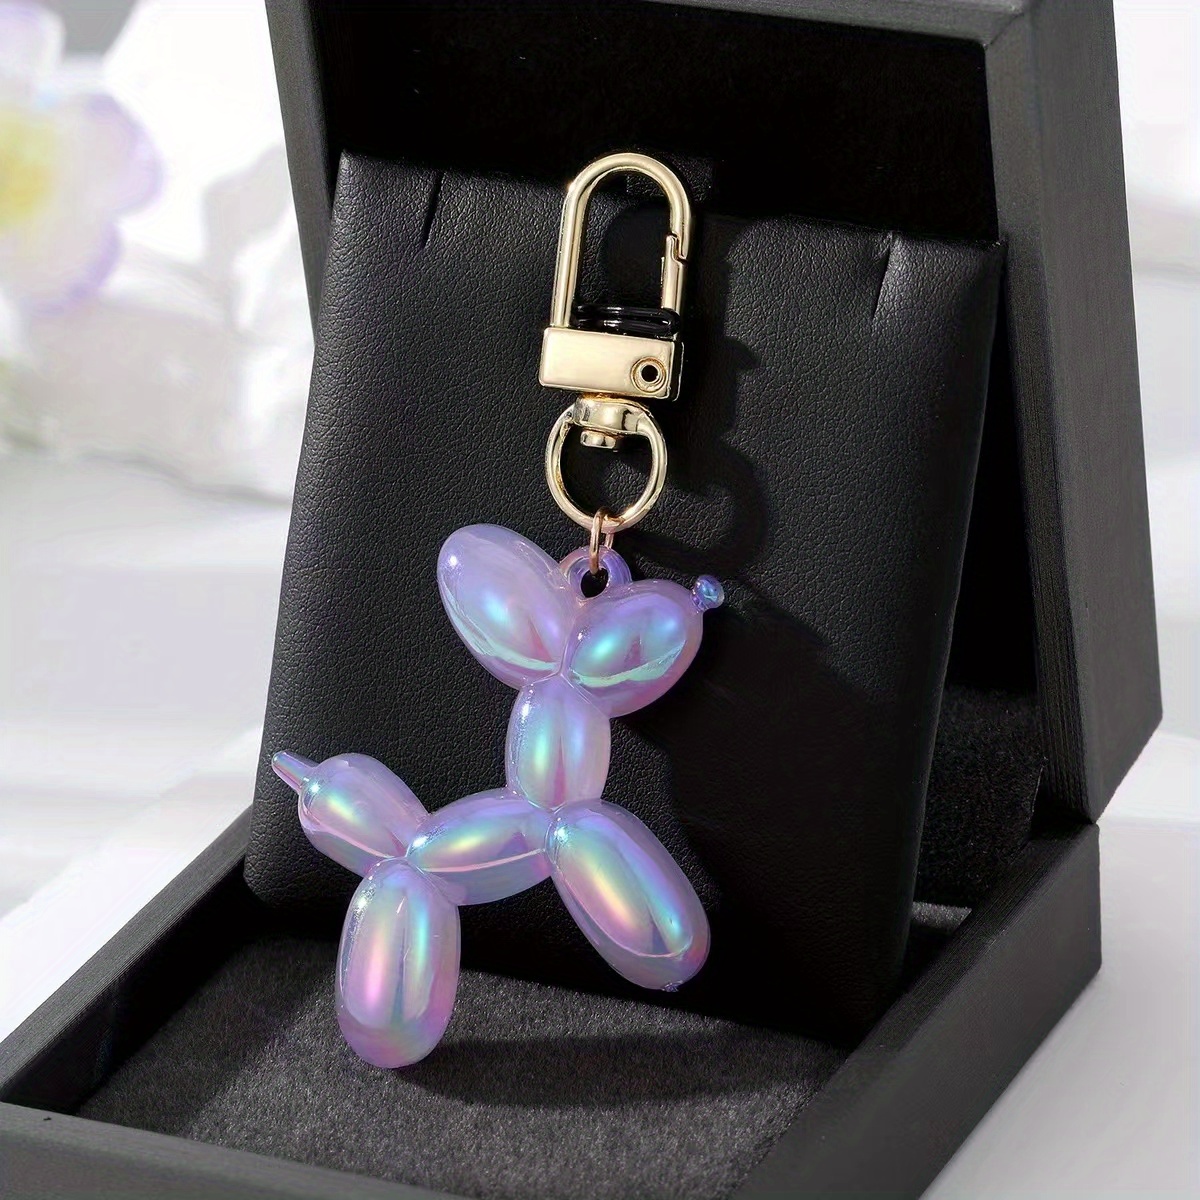 lv iridescent keychain key ring bag charm - clothing & accessories